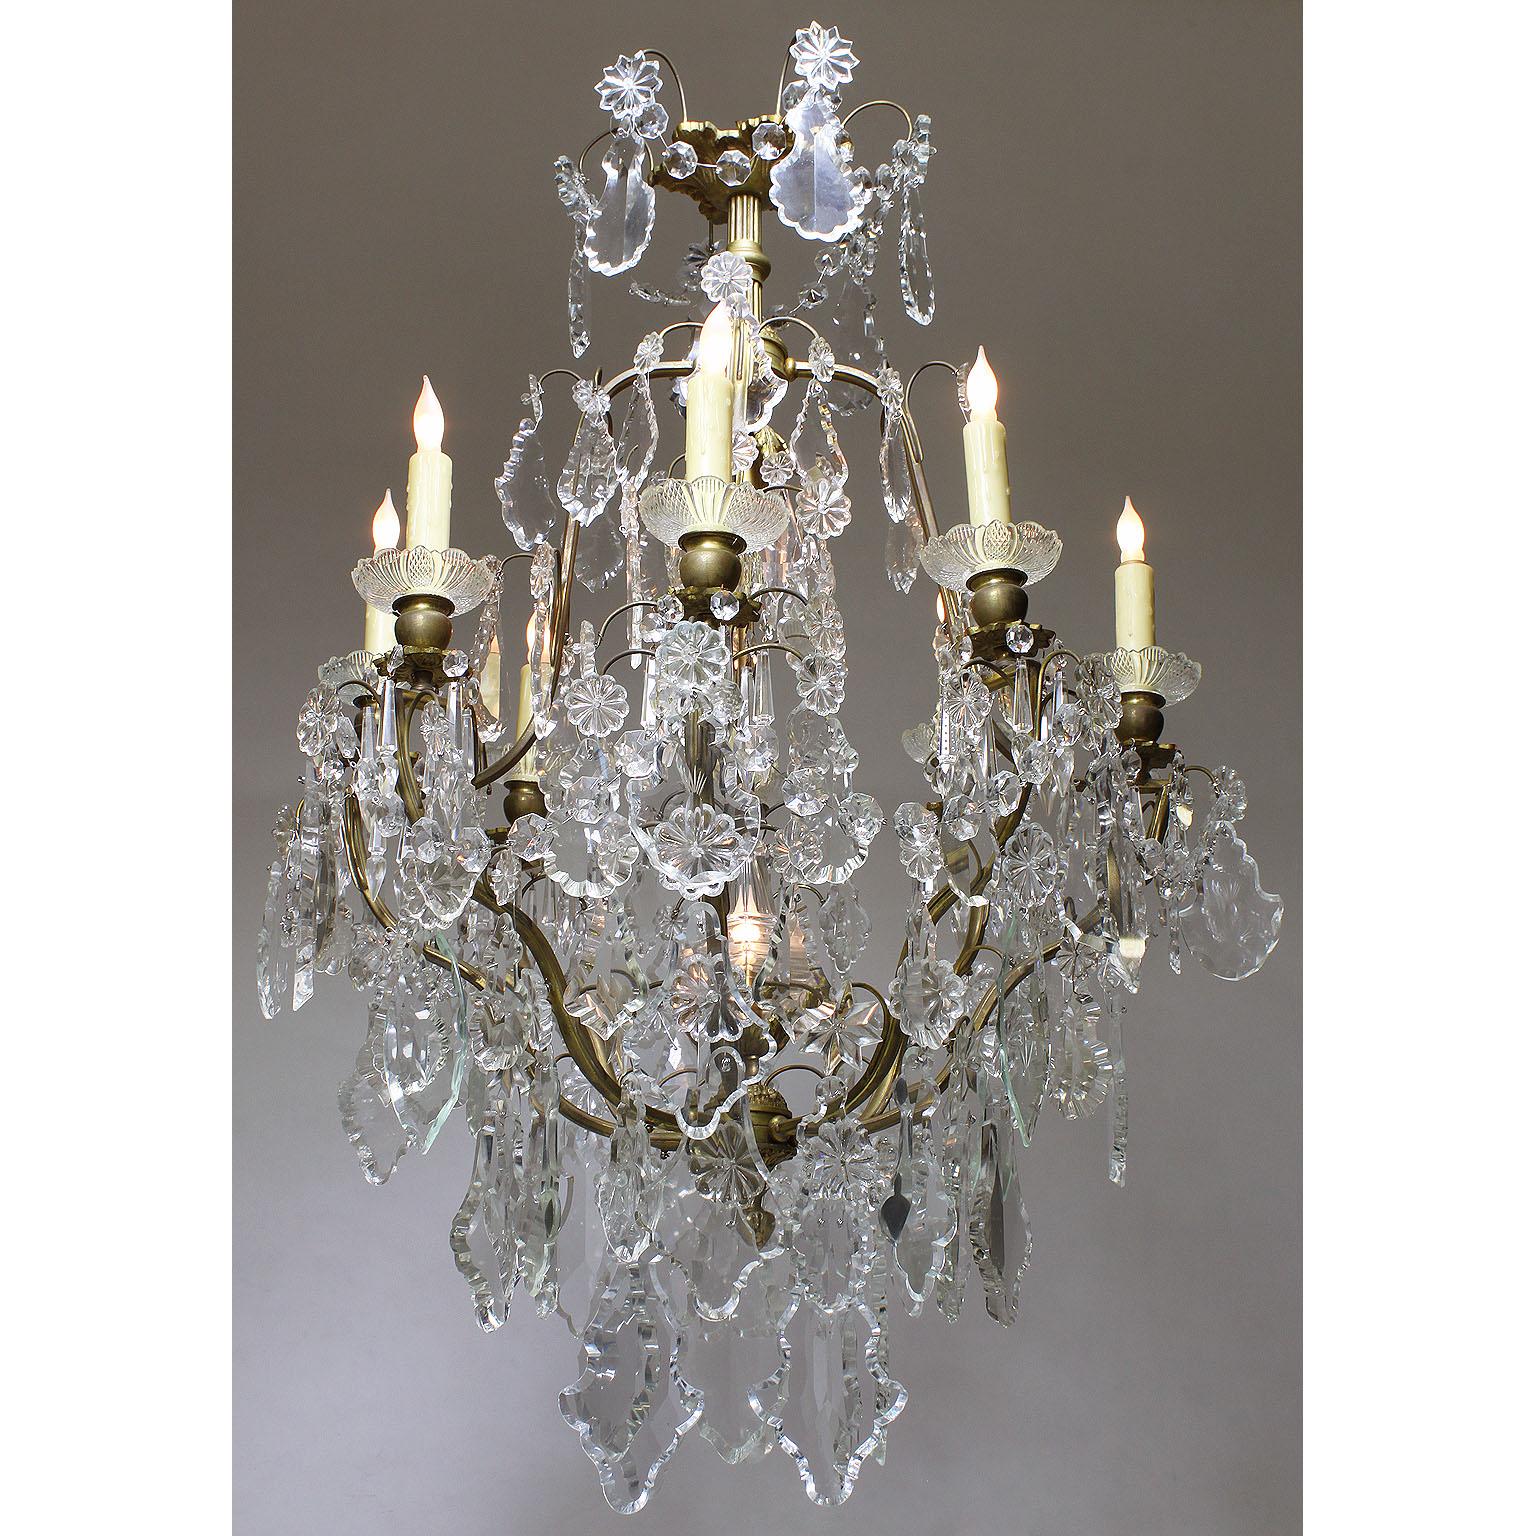 A French Louis XV style gilt-metal and cut-glass ten-light chandelier. The caged body surmounted with ten scrolled candle-arms, each fitted with molded glass wax-holders, with two interior lights, the bottom light inside a glass obelisk, all